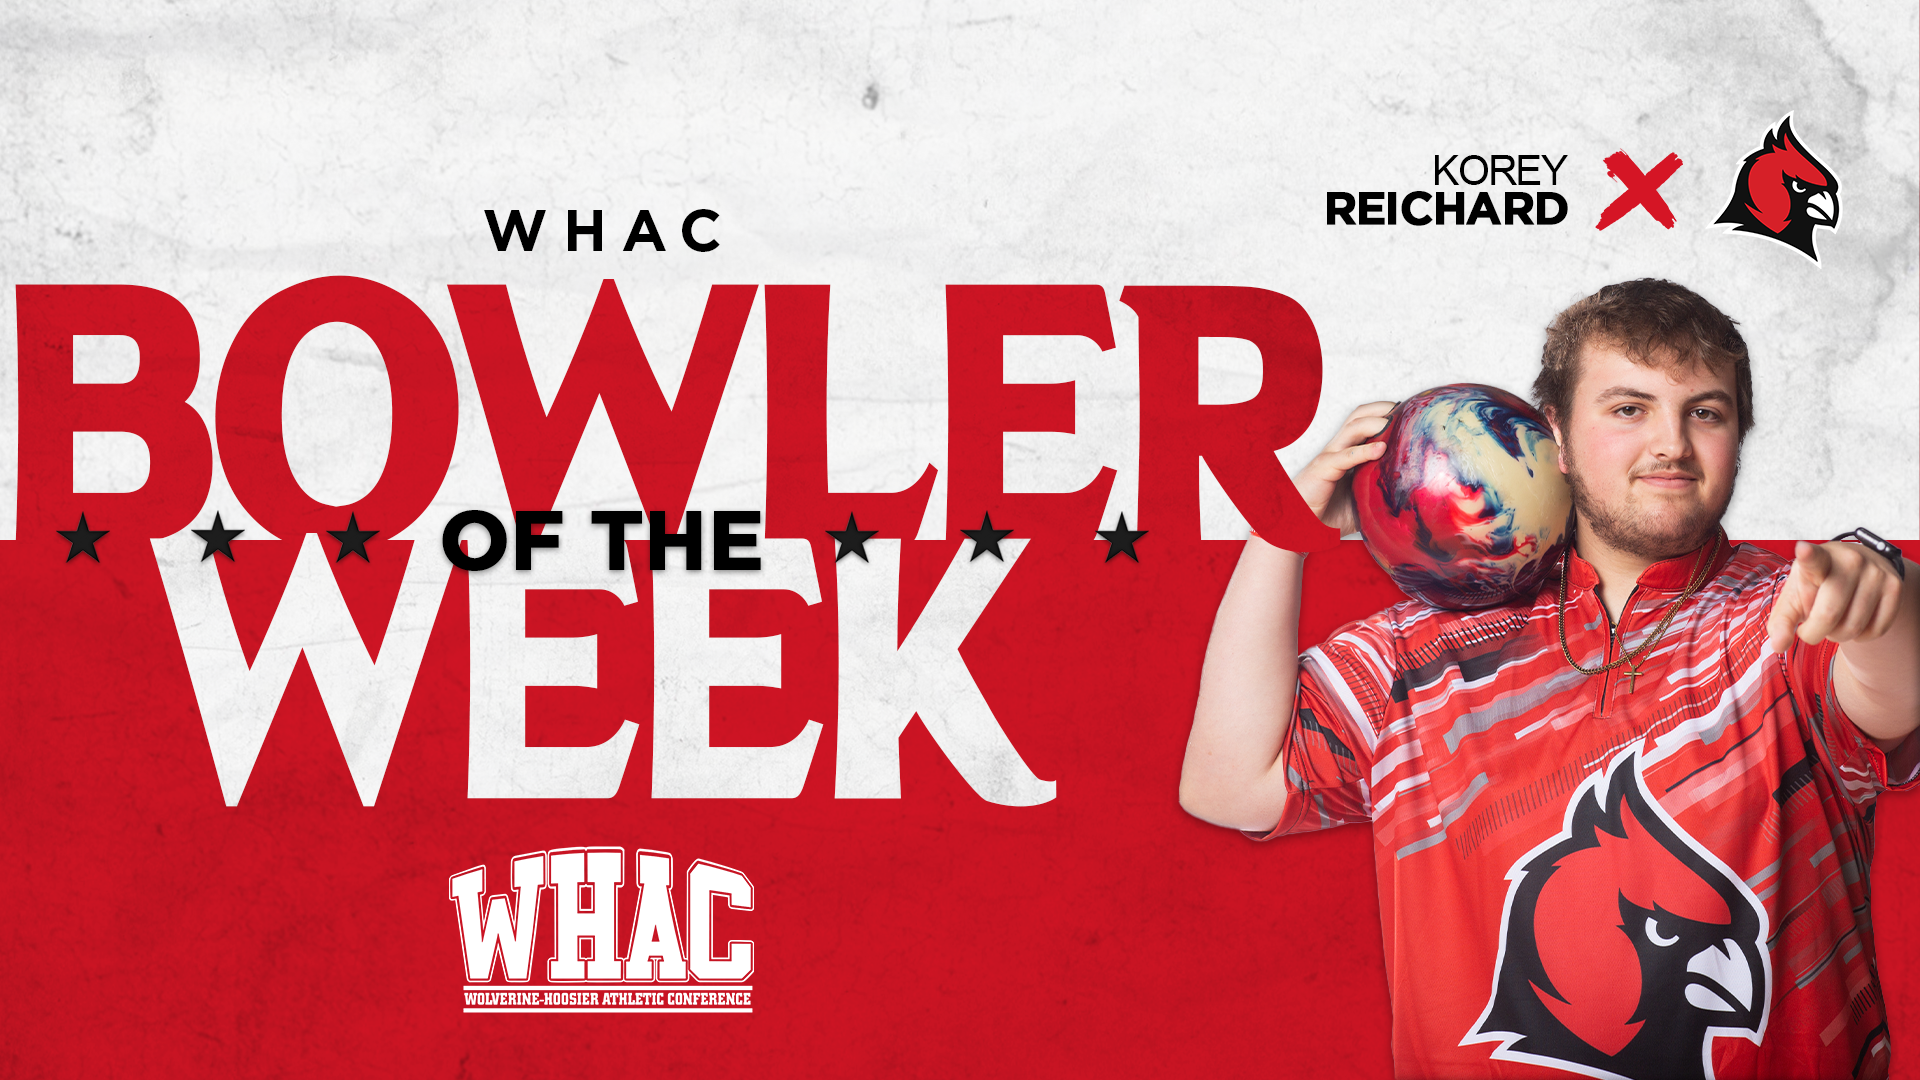 Reichard earns WHAC Bowler of the Week Honors